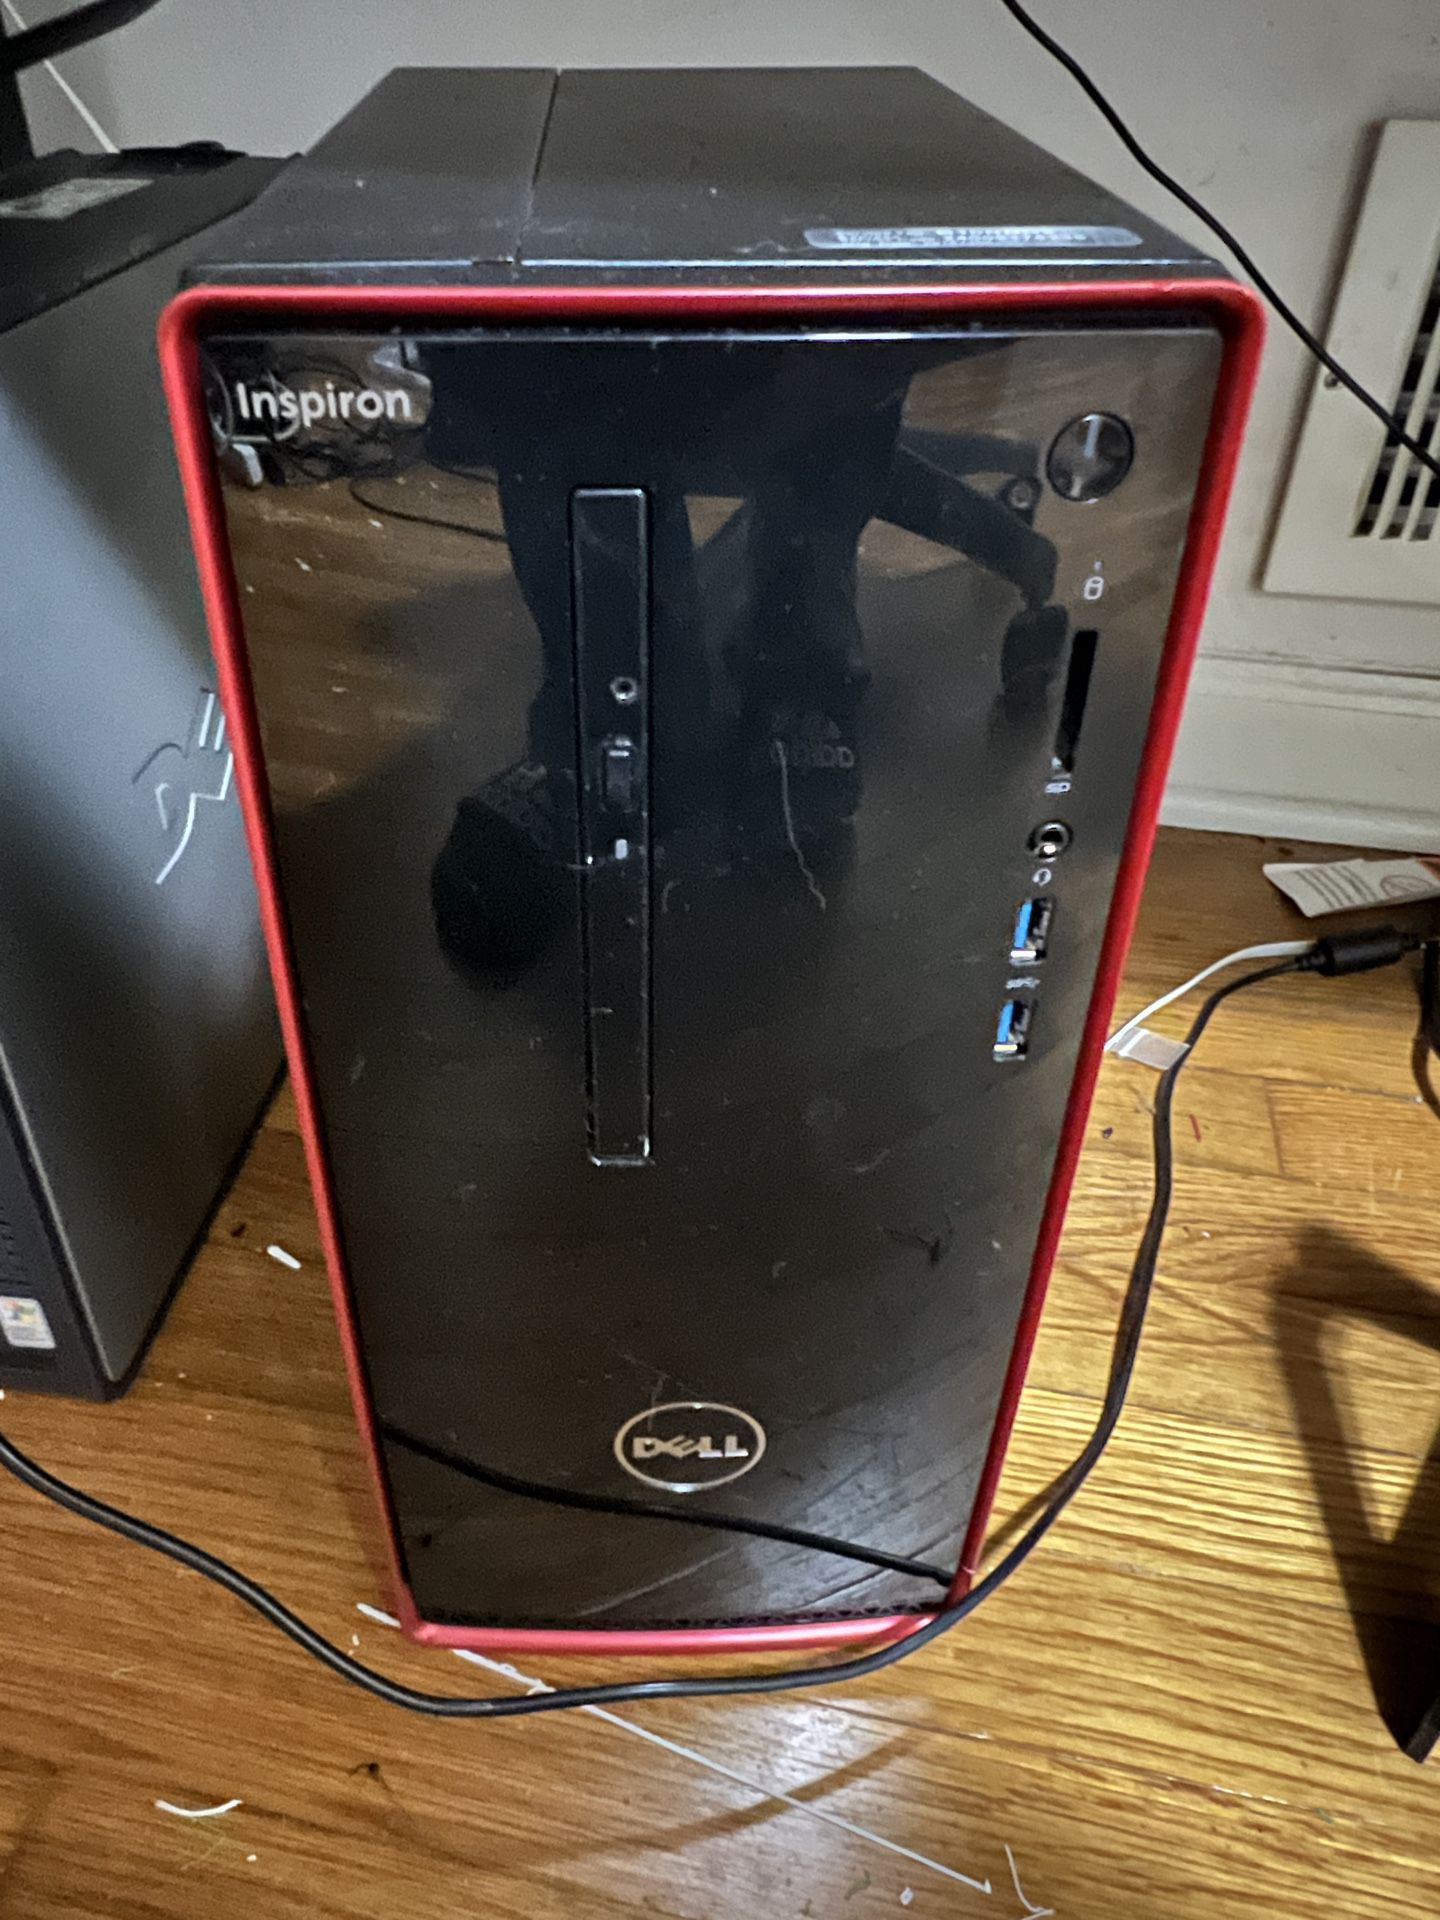 Dell Inspiron Tower